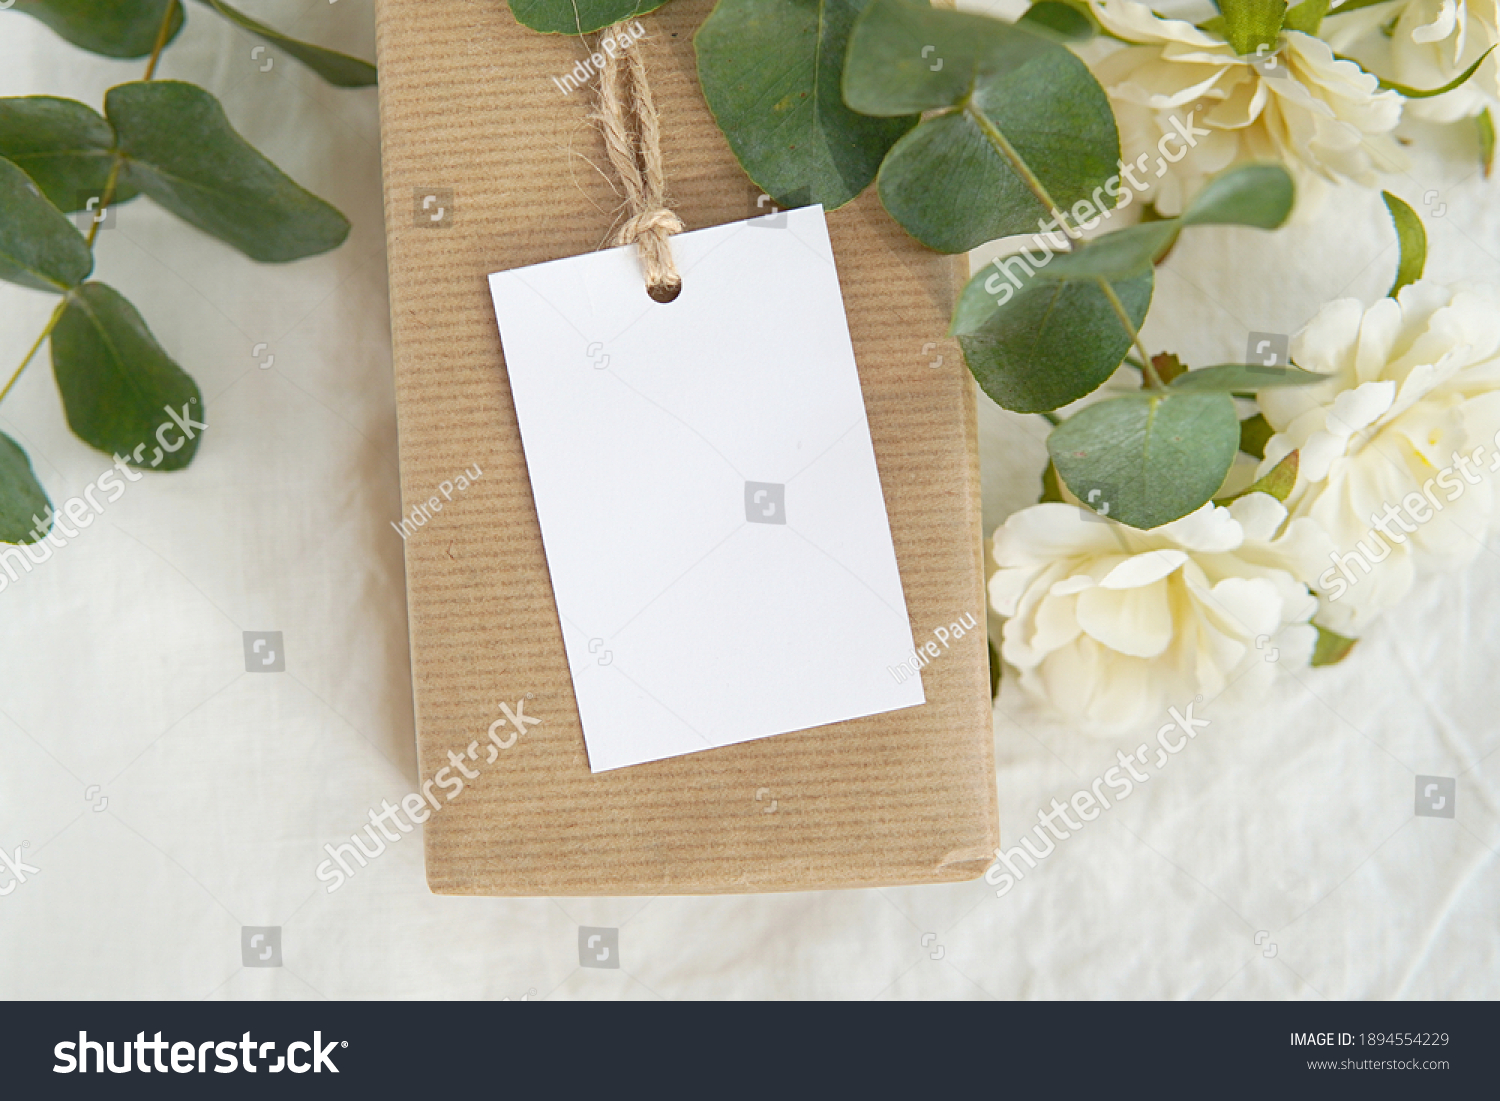 Thank you gift tag mockup for wedding, bridal shower, rustic wedding favor tag, rectangle  label mock up on kraft paper box, eucalyptus branches, white flowers. #1894554229